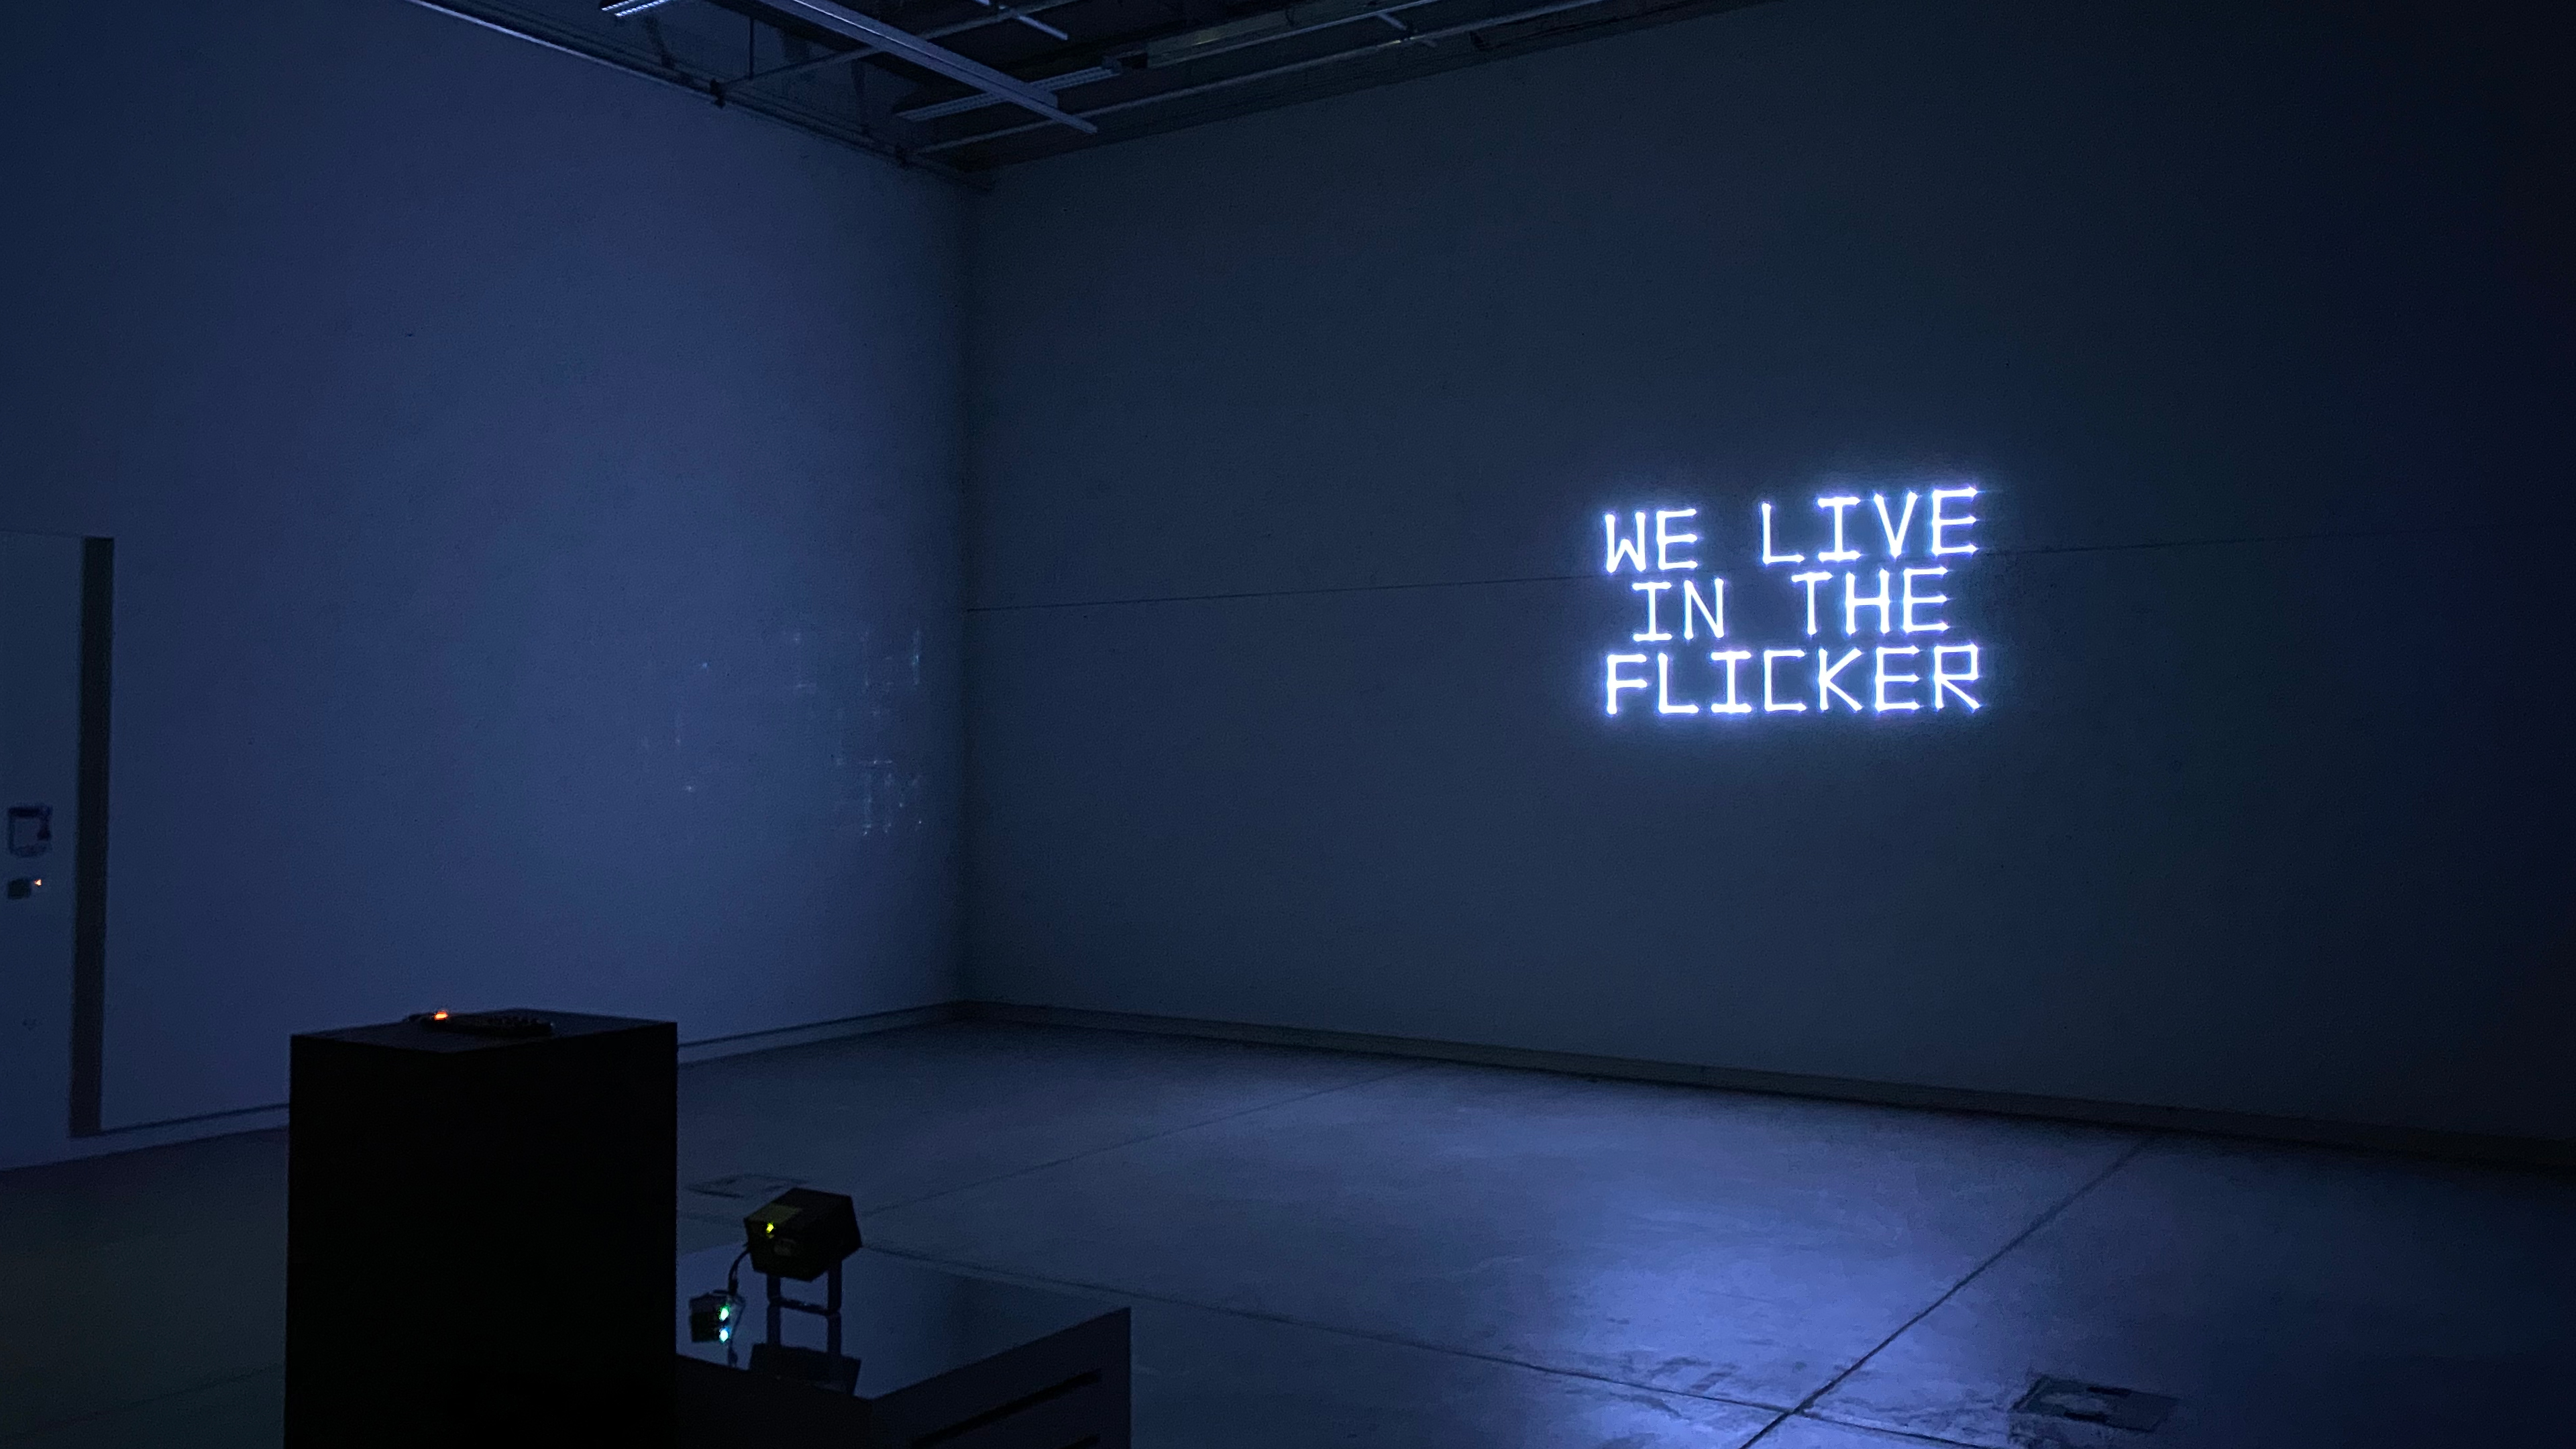 A laser projection onto a wall in a dark room. White text: We live in the flicker.